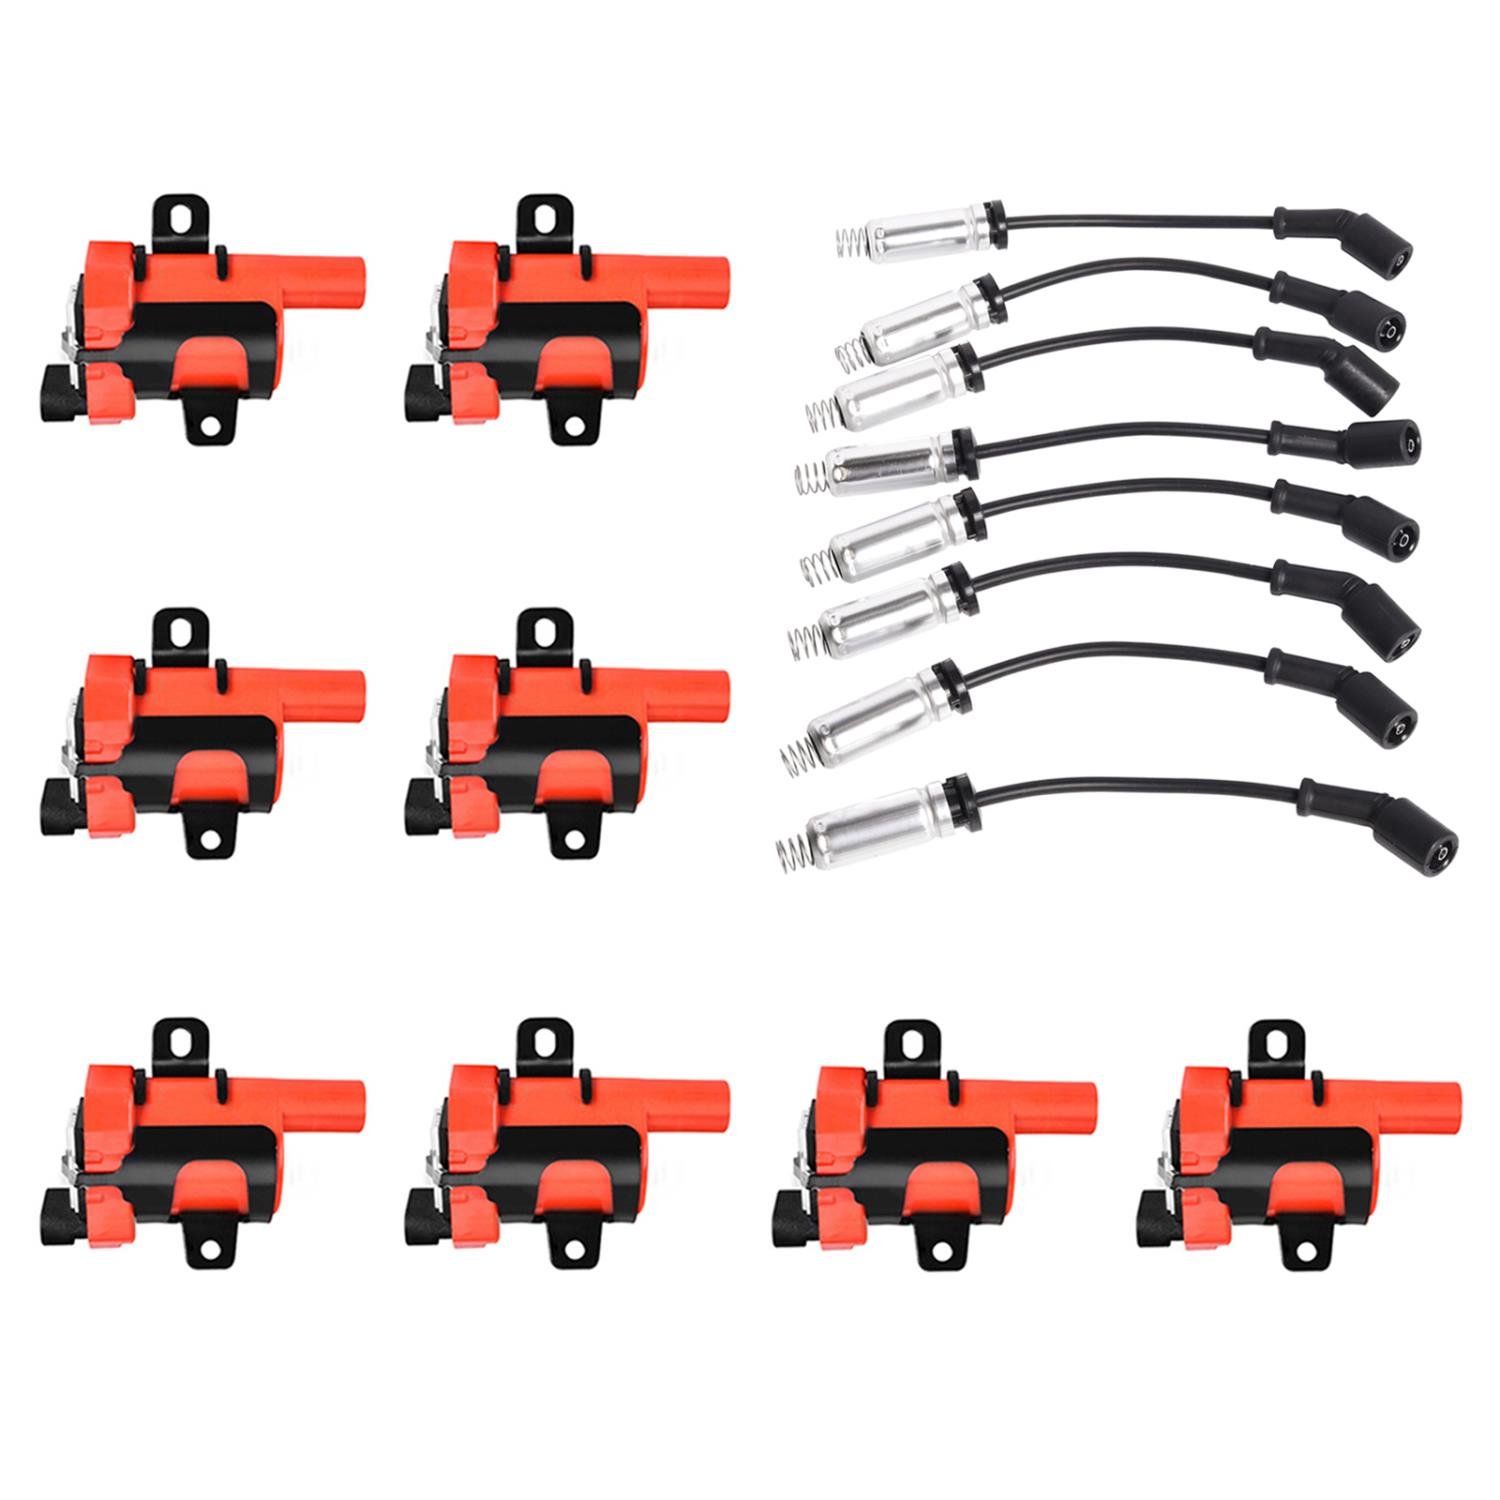 High-Performance Ignition Coil and Spark Plug Wire Kit for Chevy Silverado 4.8/5.3/6.0L, GMC Sierra/Yukon 4.8/5.3/6.0L